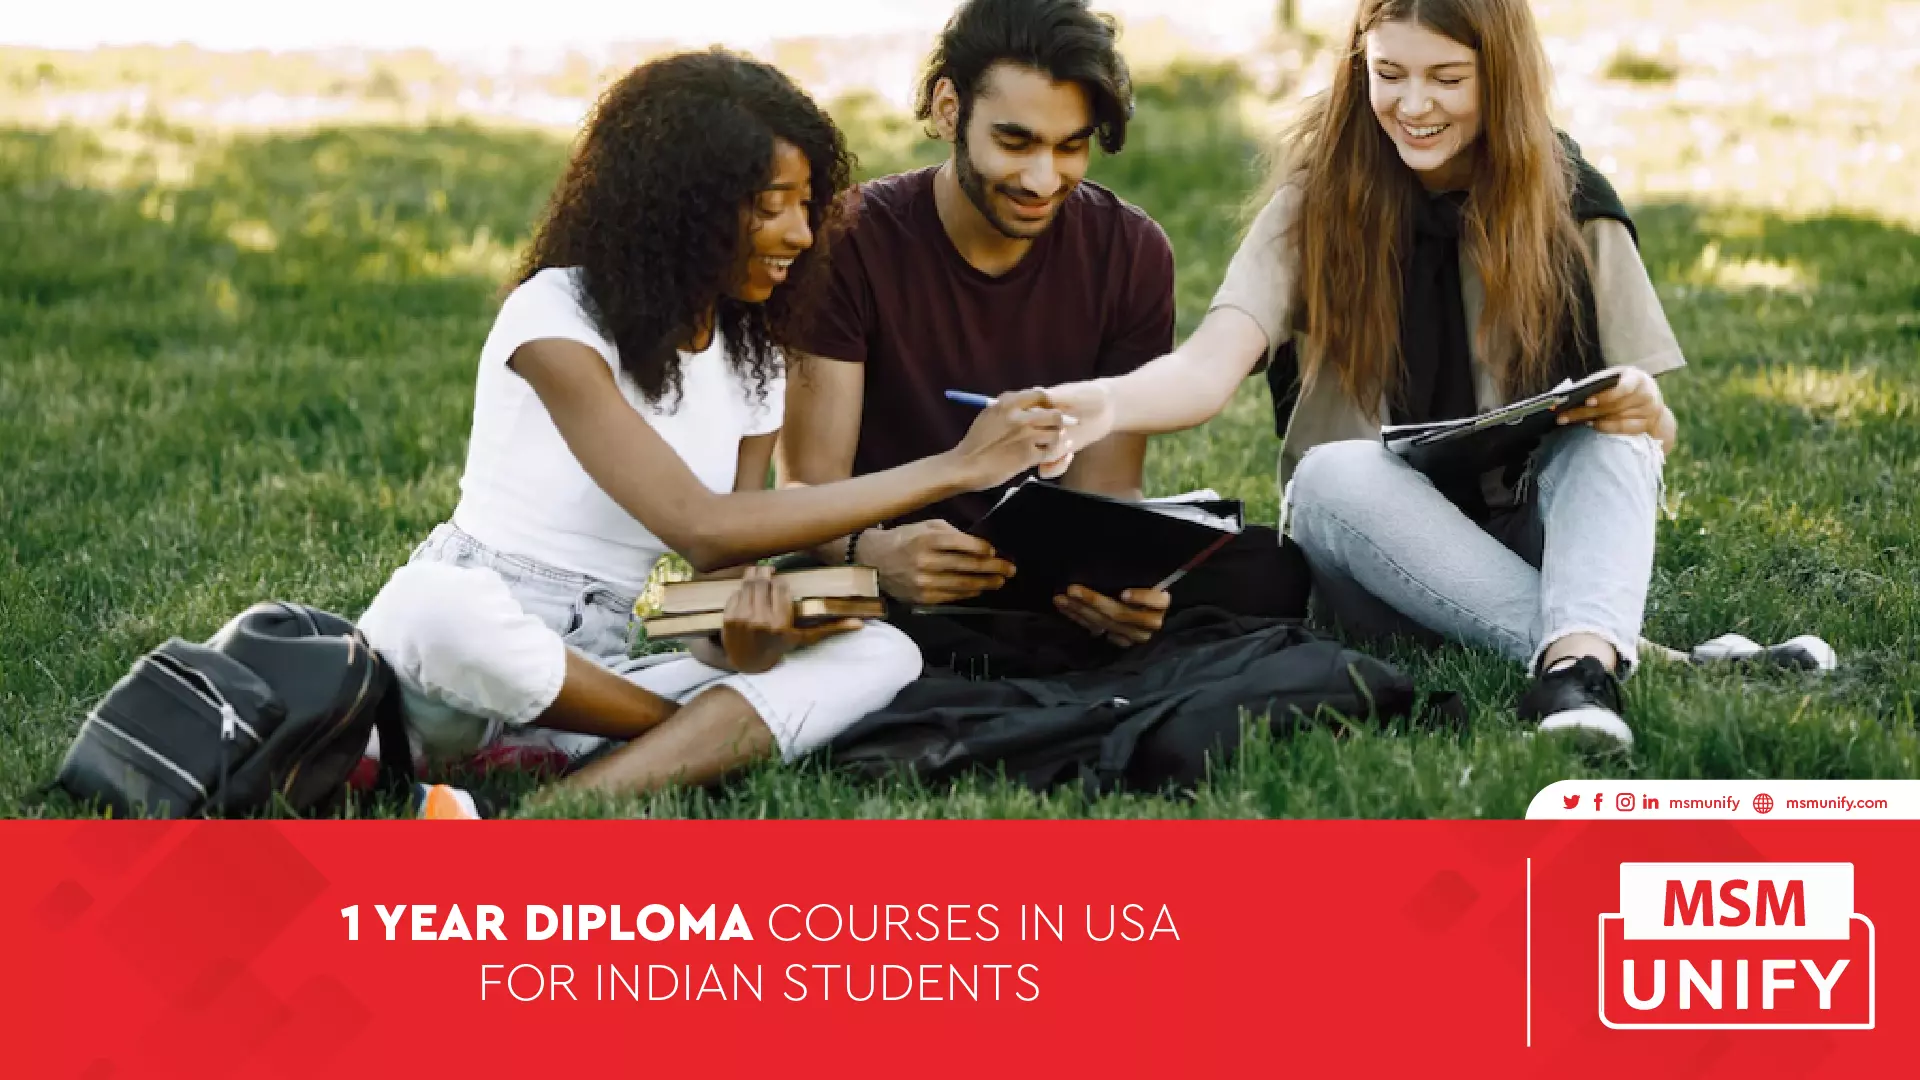 MSM Unify 1 Year Diploma Courses In USA For Indian Students